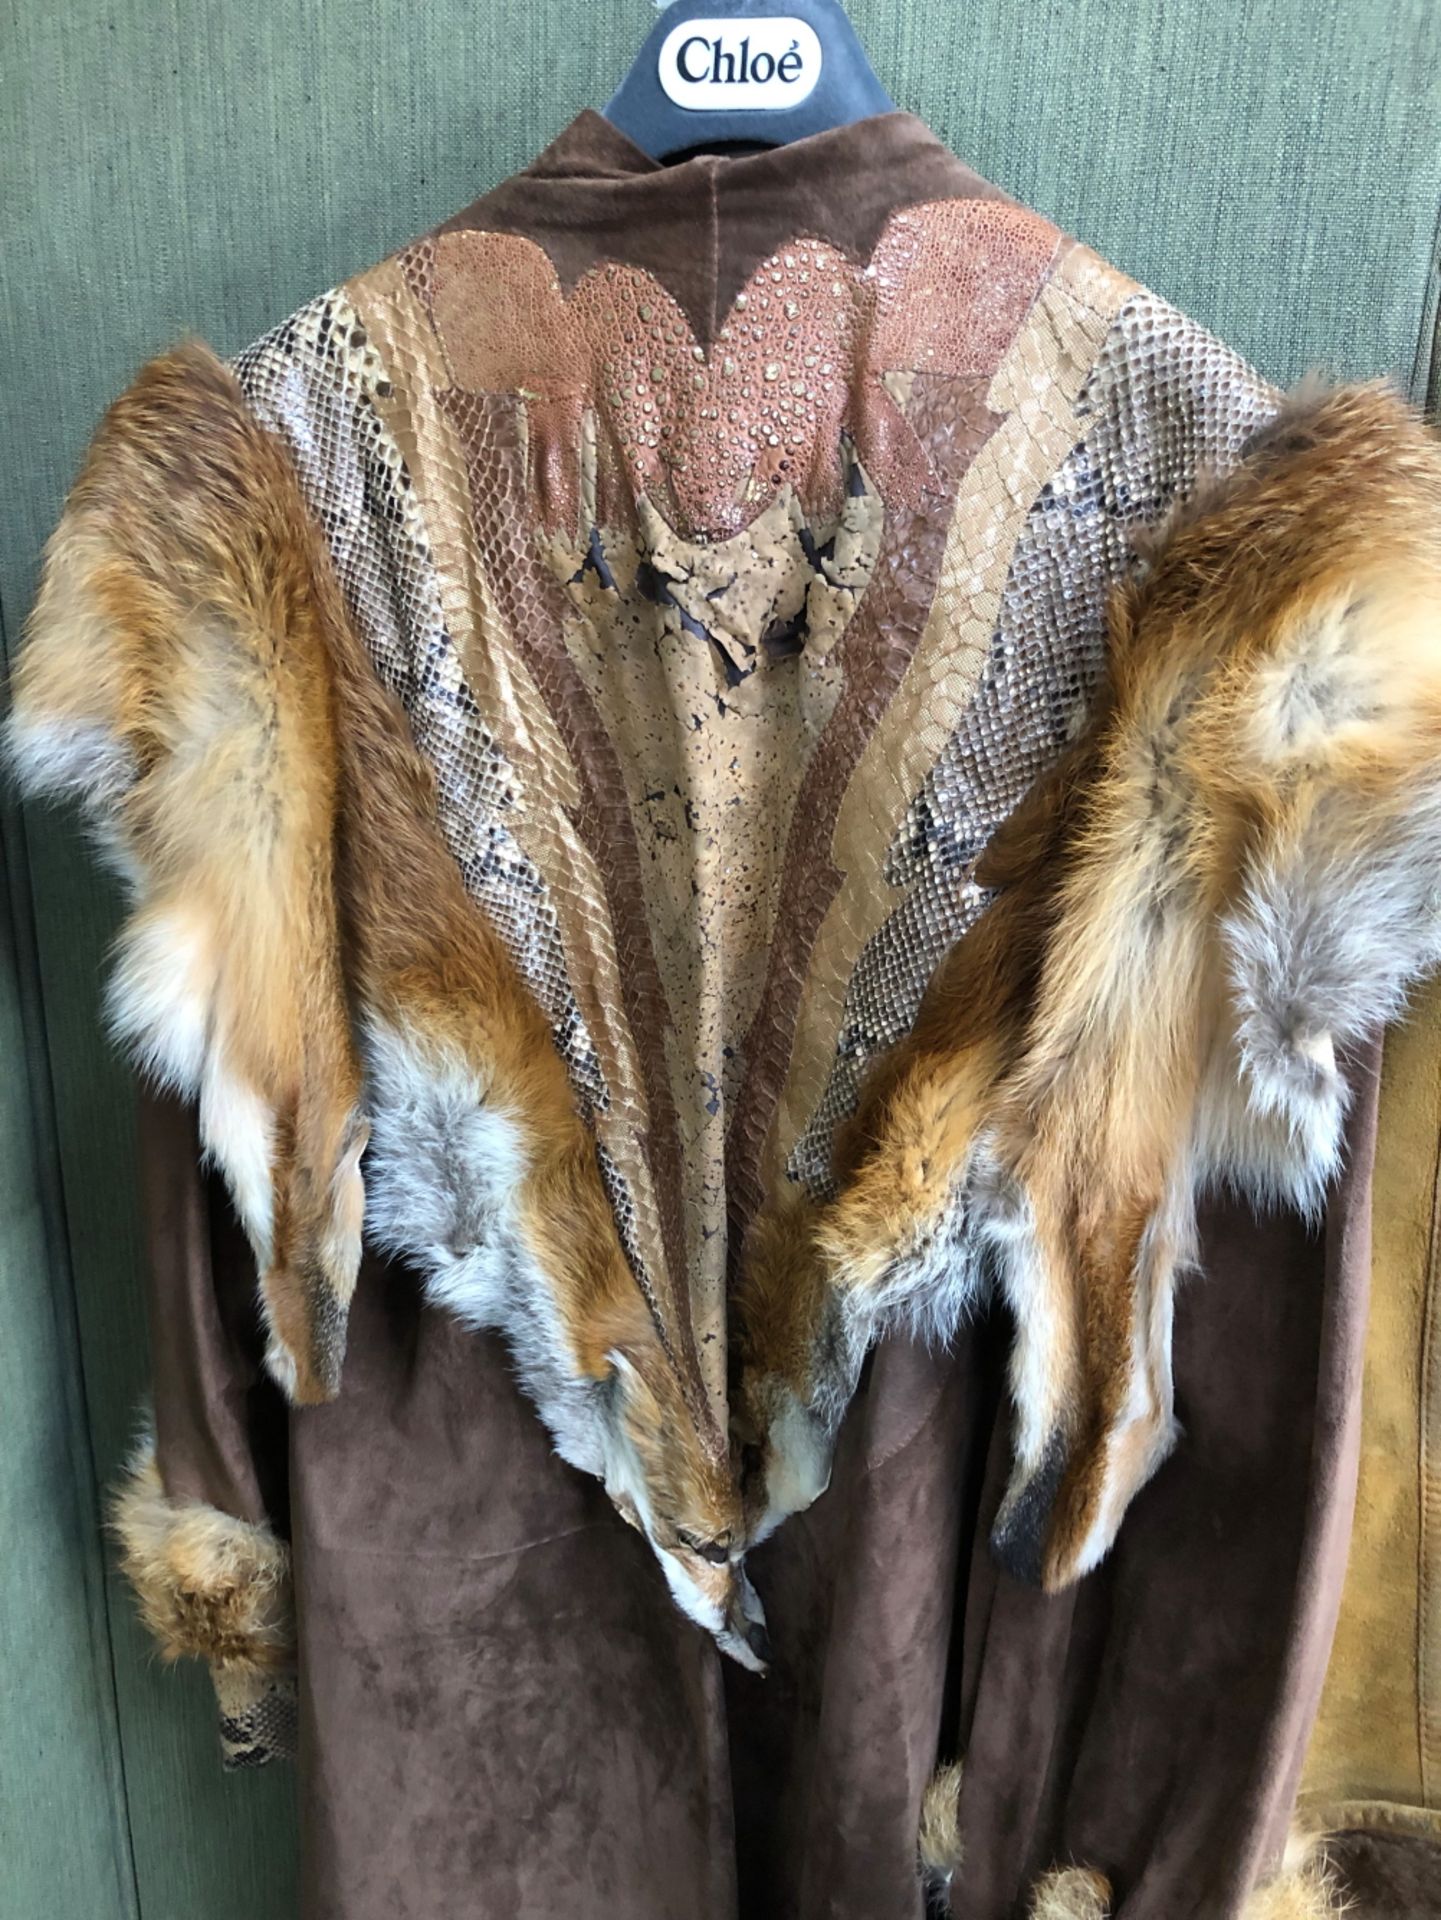 JACKETS: STRIWA 3/4 LENGTH FAWN COLOURED SHEEP SKIN JACKET WITH HOOD SIZE STATED EUR 36, TOGETHER - Image 13 of 21